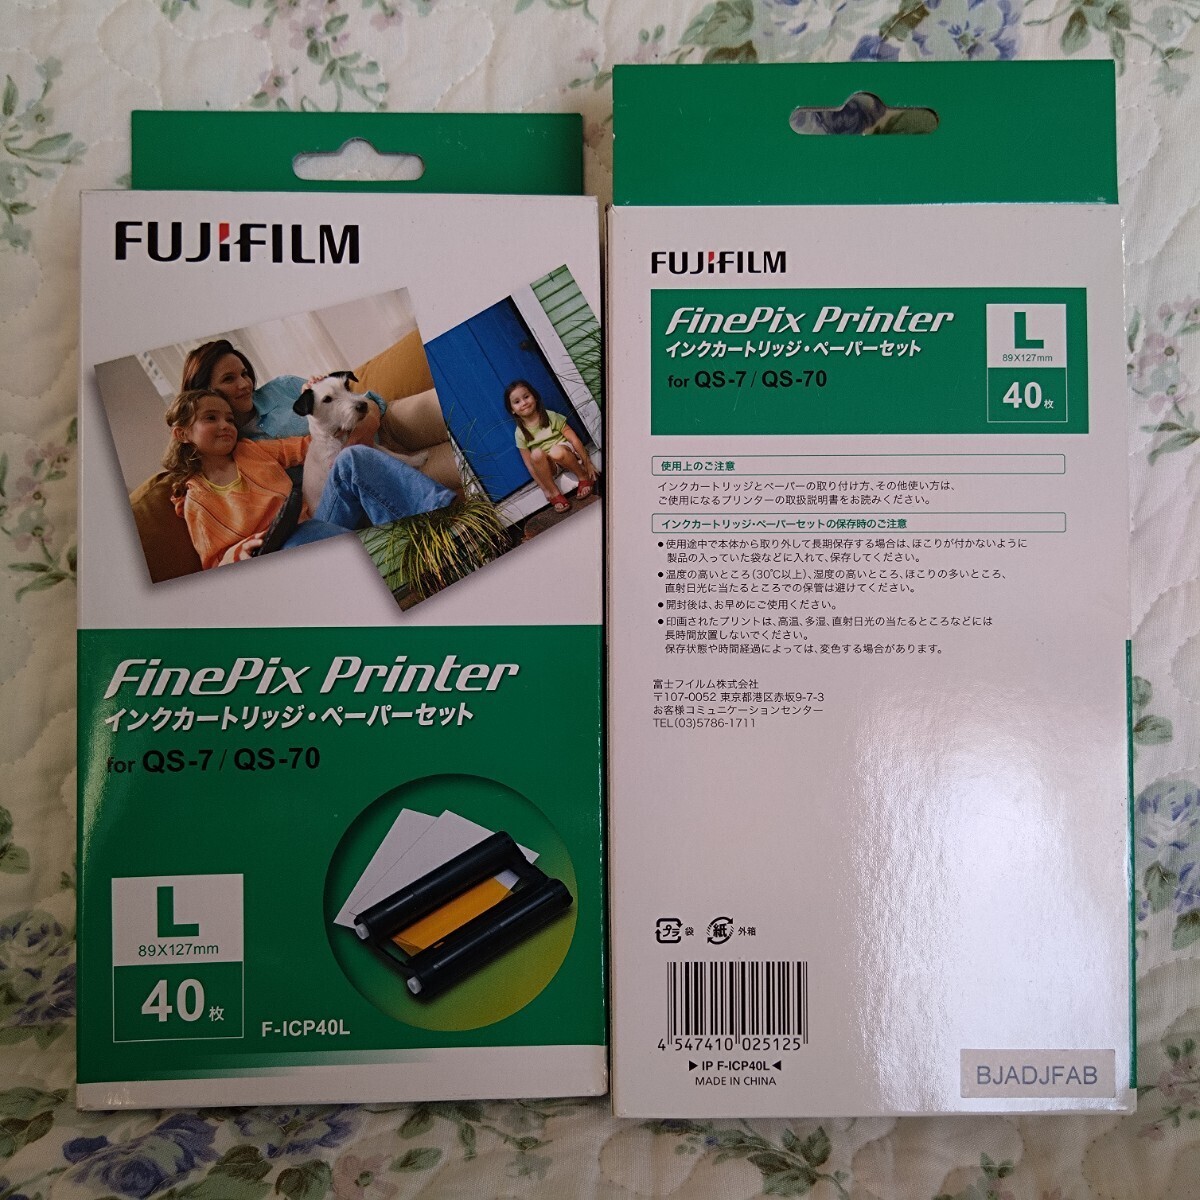 FUJIFILM Fuji film records out of production .. goods FinePix Printer QS-7*QS-70 for exclusive use ink cartridge * paper set 3 box set sale 